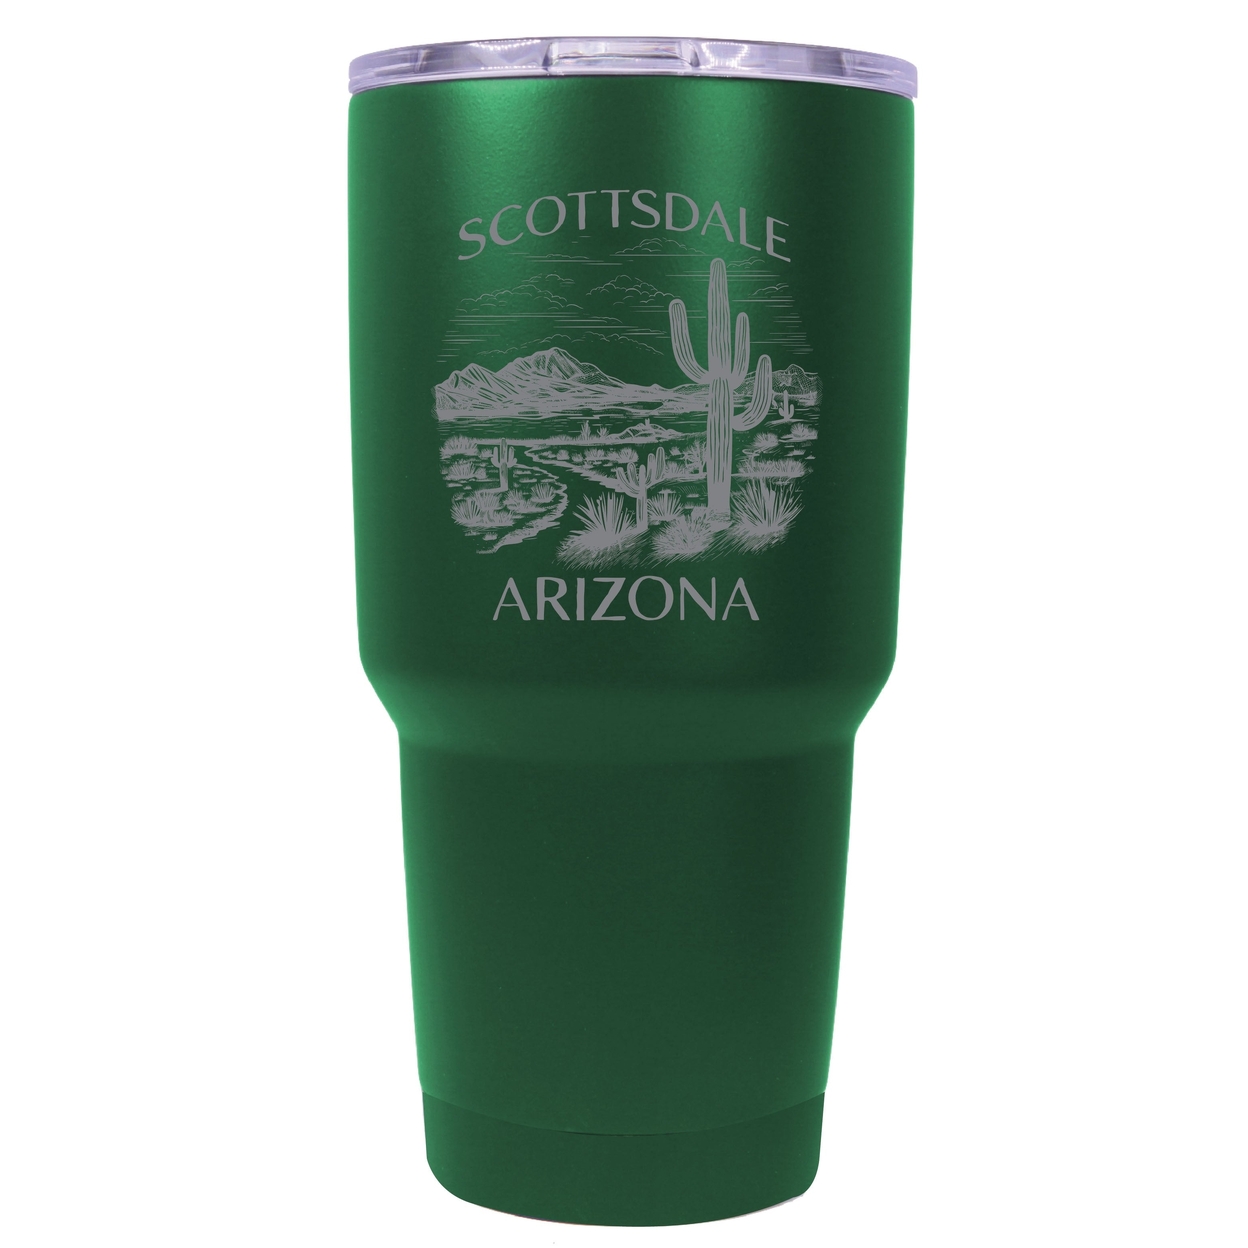 Scottsdale Arizona Souvenir 24 Oz Engraved Insulated Stainless Steel Tumbler - Green,,4-Pack